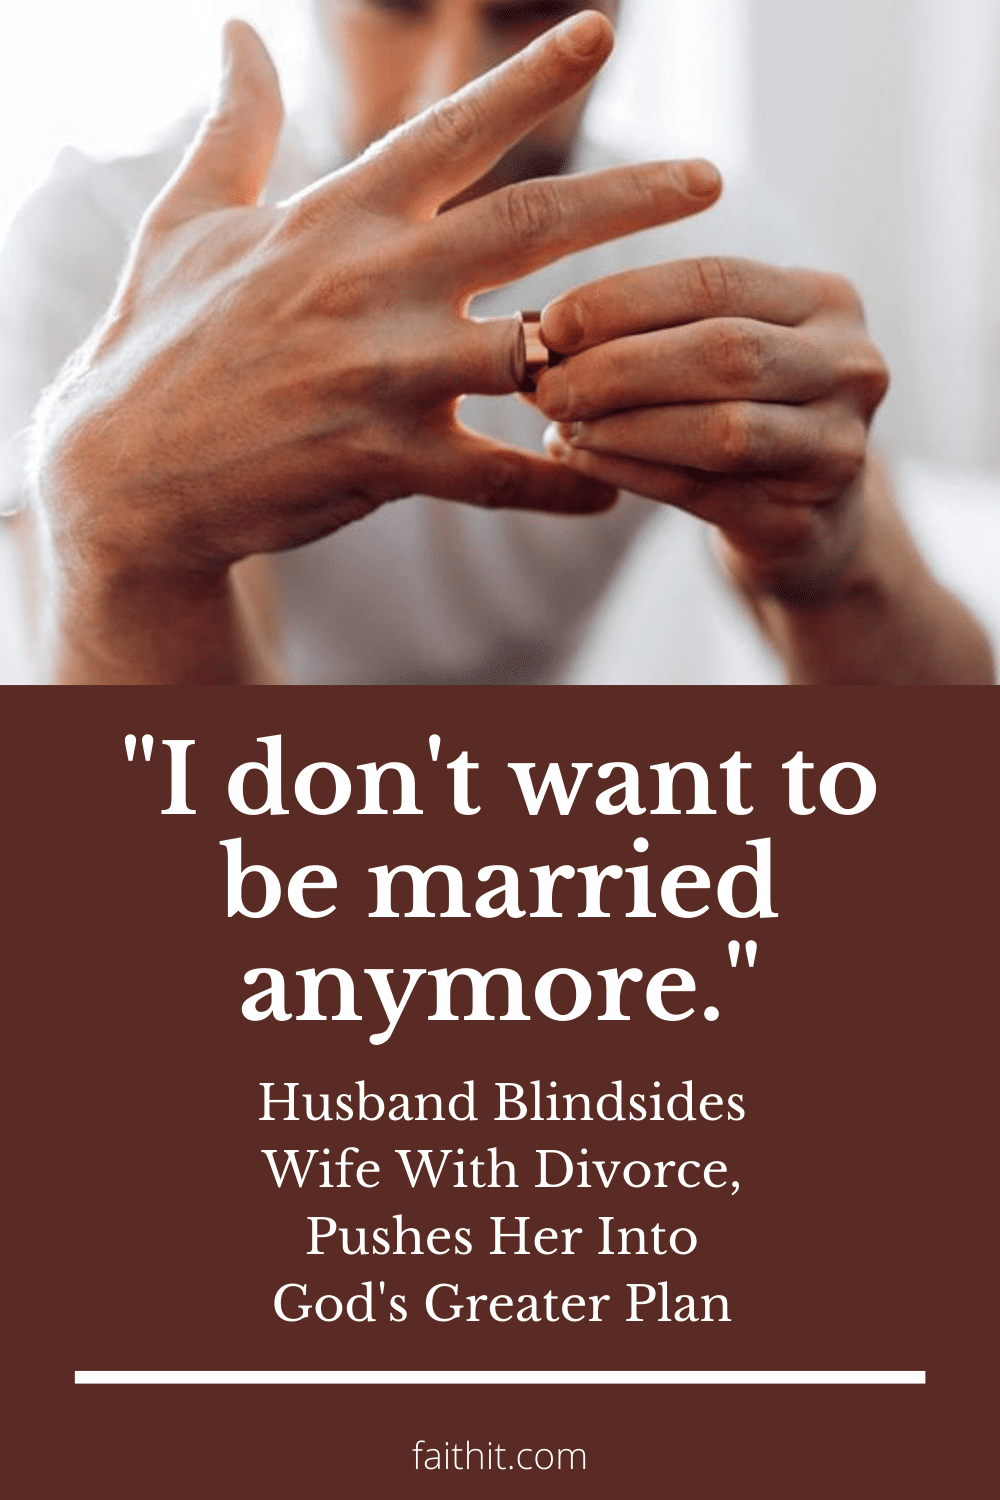 i don't want to be married anymore